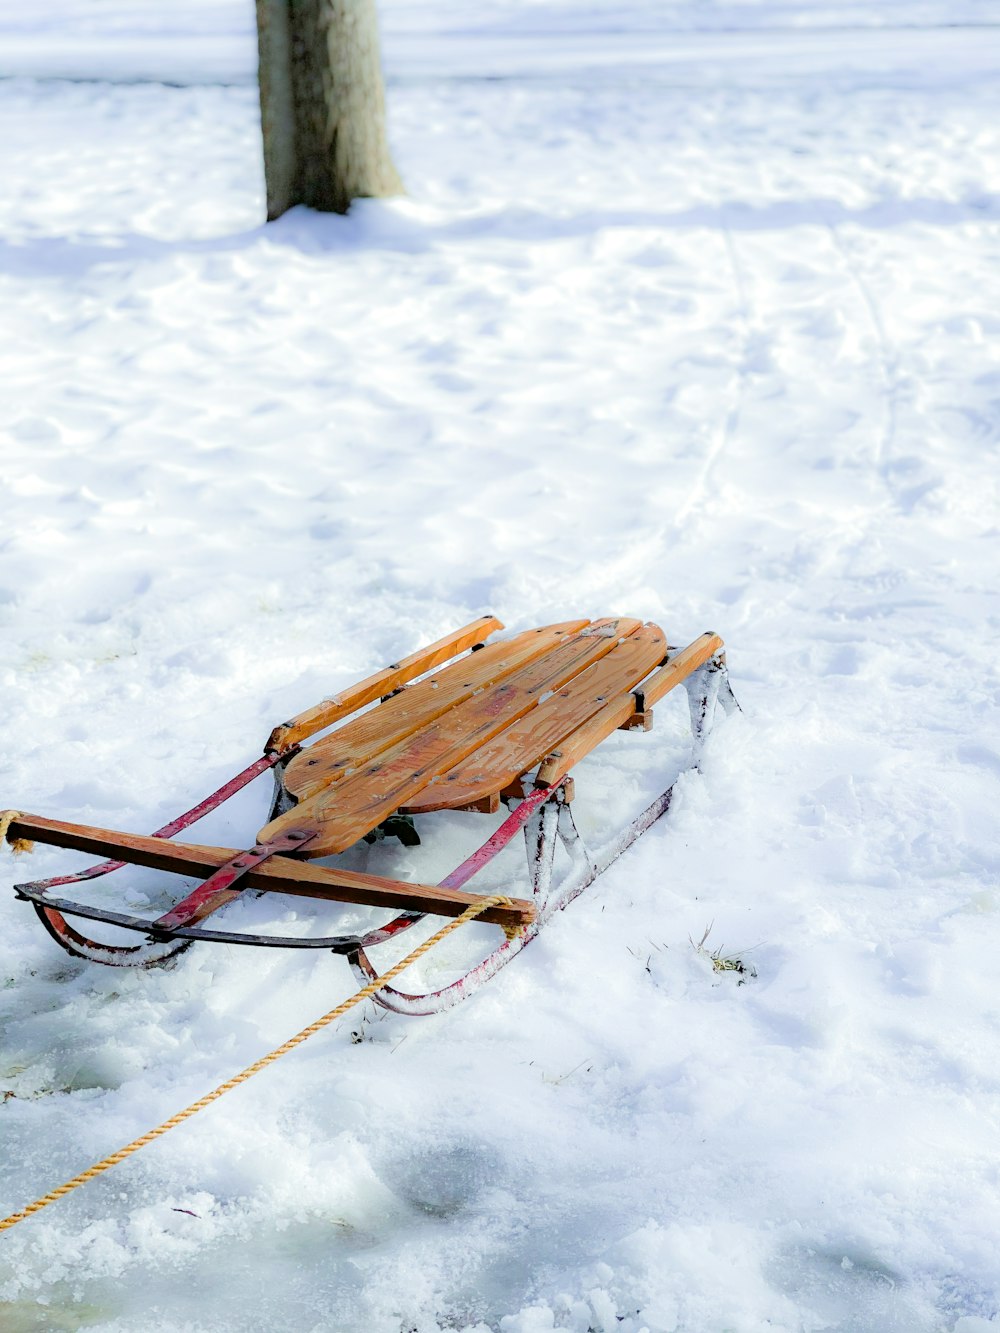 a sled with a wooden sled attached to it in the snow